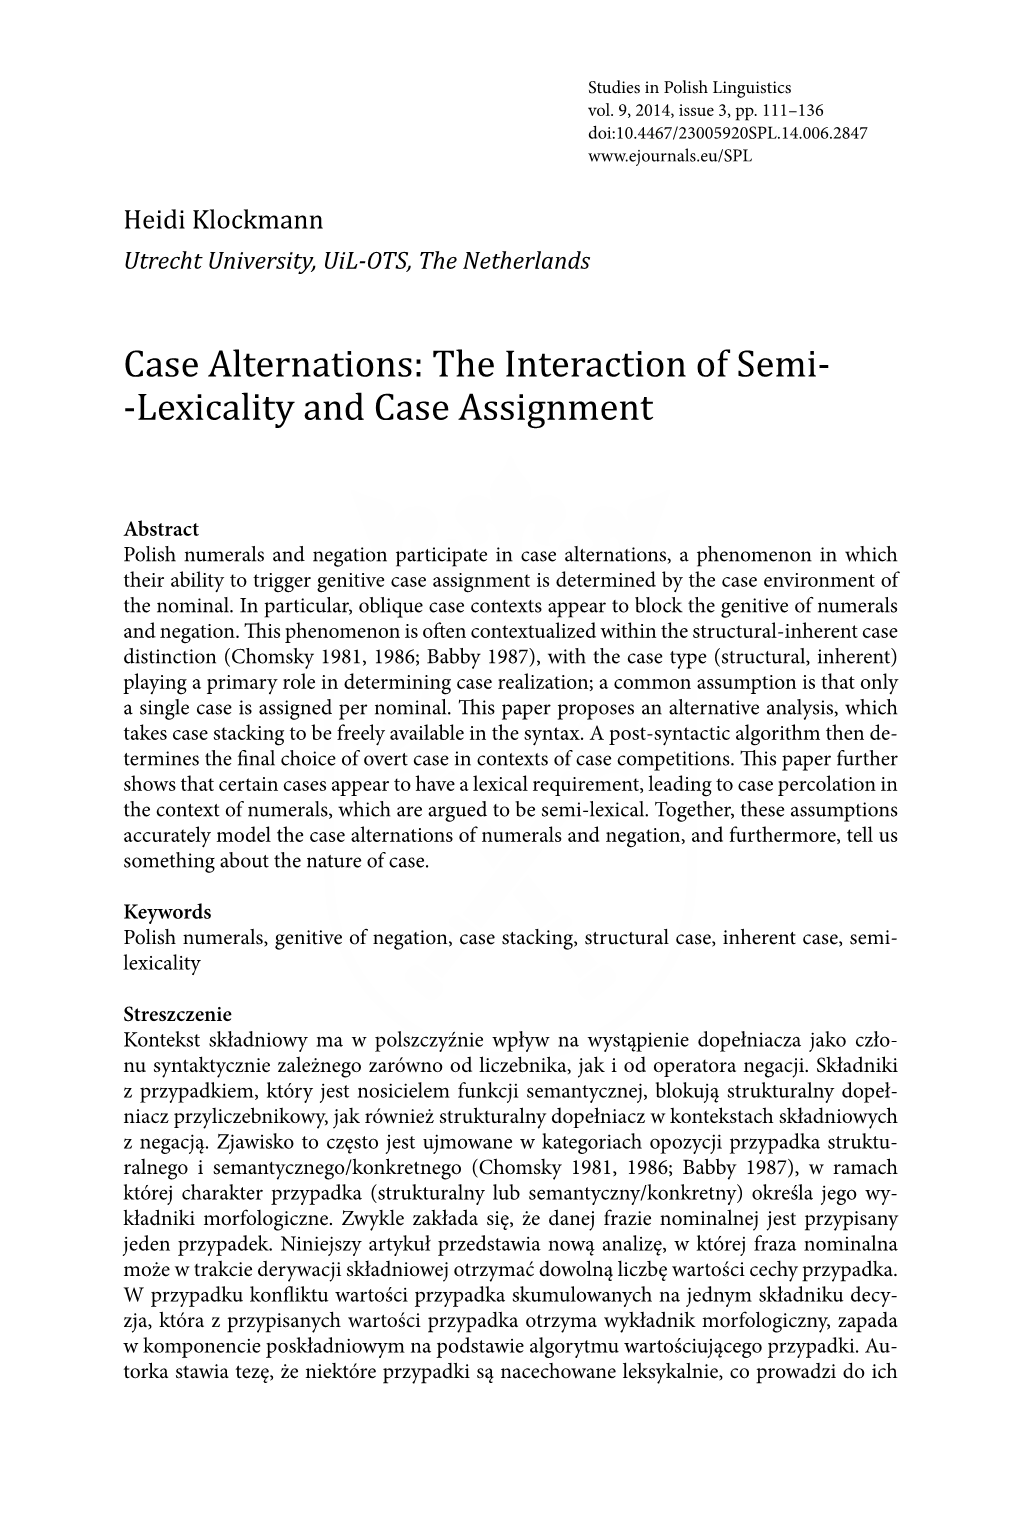 Case Alternations: the Interaction of Semi- -Lexicality and Case Assignment